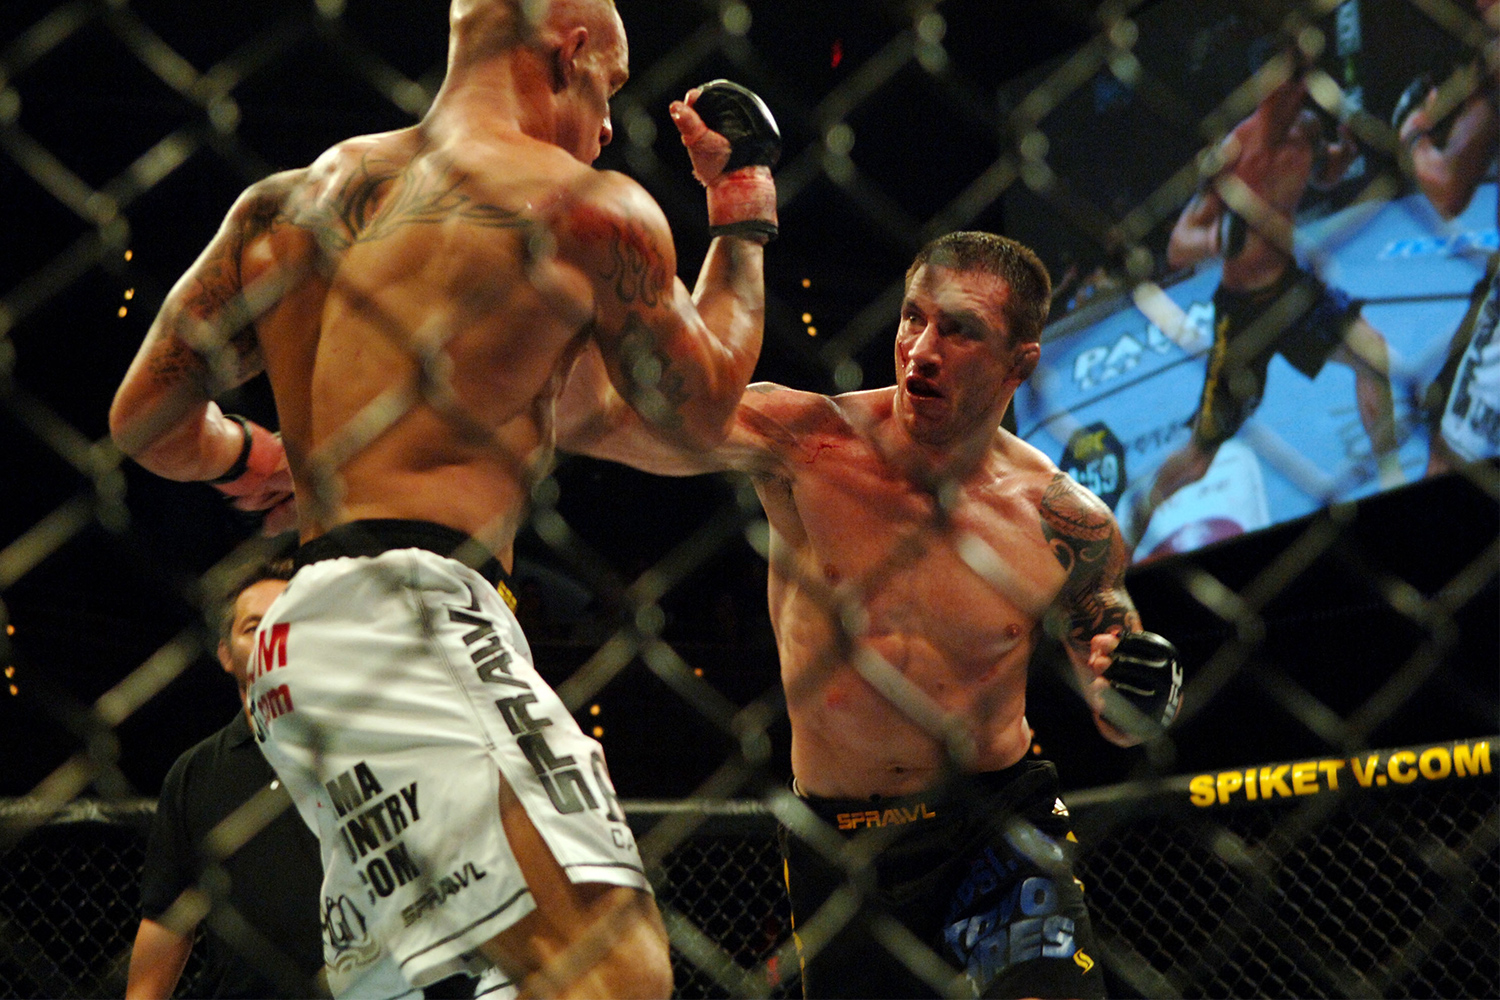 Nathan Quarry [right] throws a right hand against Pete Sell at UFC Fight Night 11 on September 19, 2007. Quarry is a named plaintiff in a class-action antitrust lawsuit against the UFC.